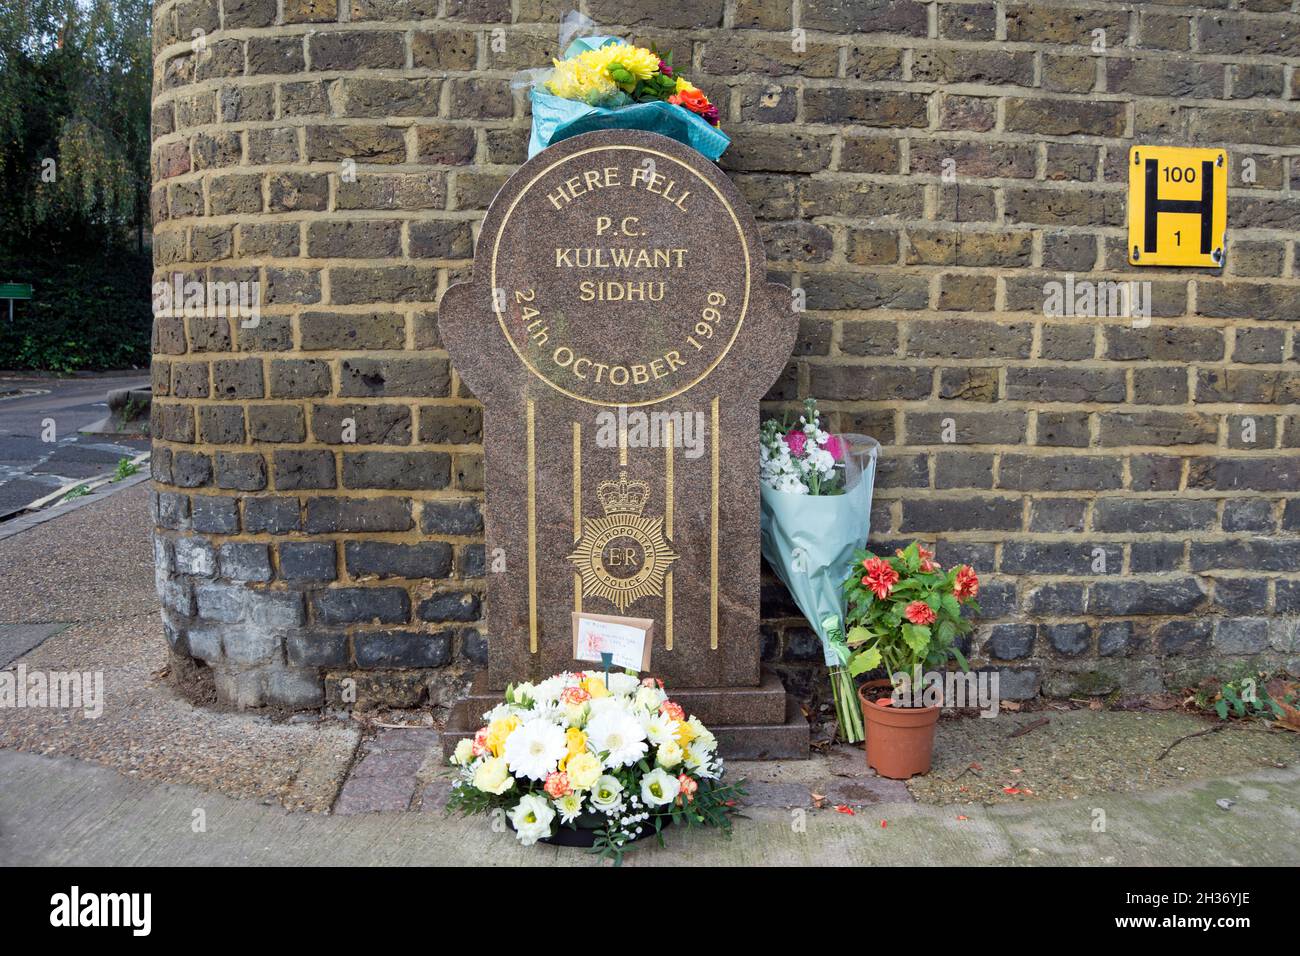 metropolitan police memorial to police constable kulwant sidhu, who died in the line of duty on 24 october 1999, in twickenham, southwest london Stock Photo